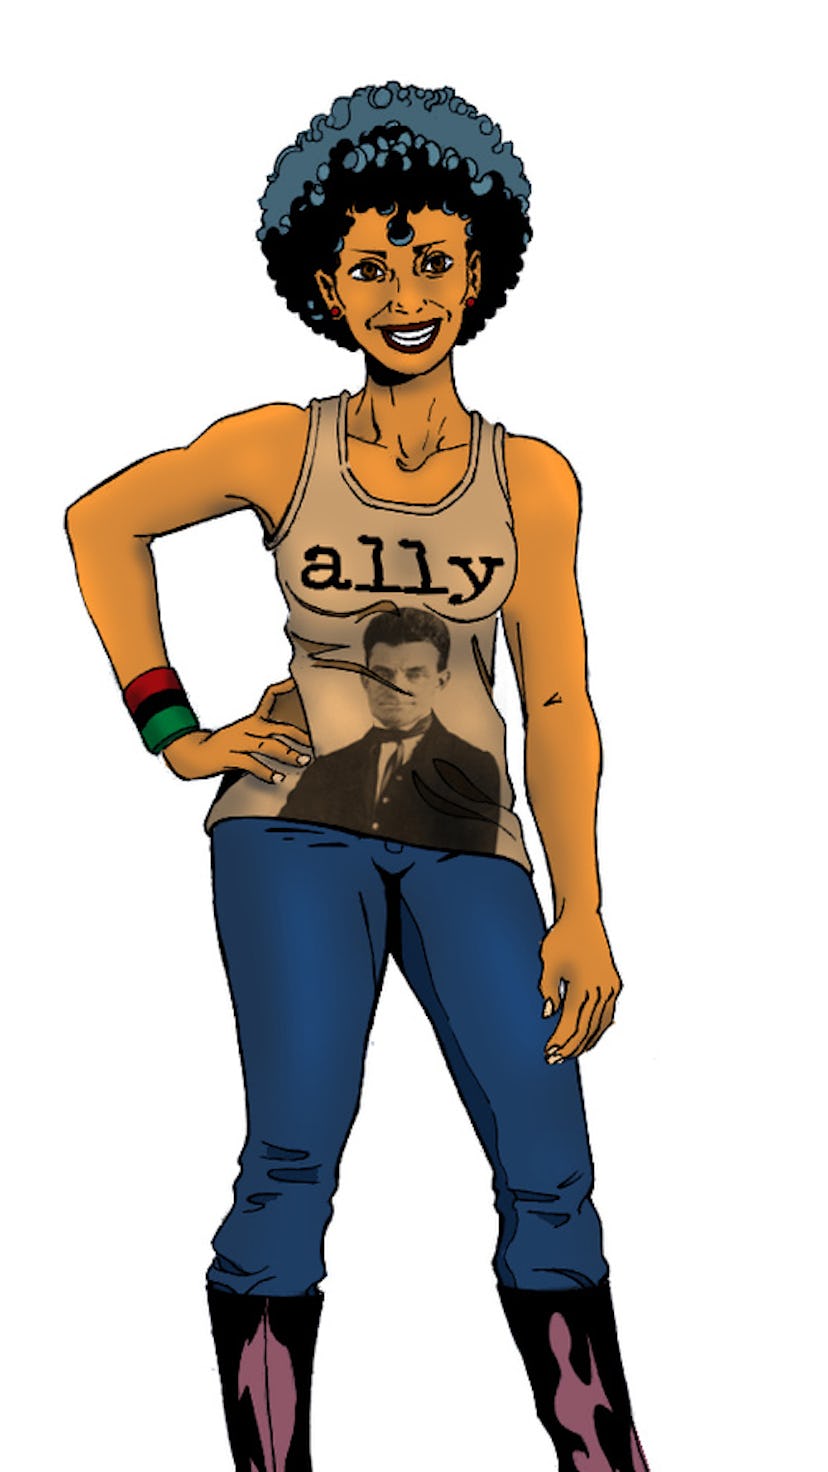 A biracial girl with a short afro and wearing a shirt that reads "ally" stands with her hand on her ...